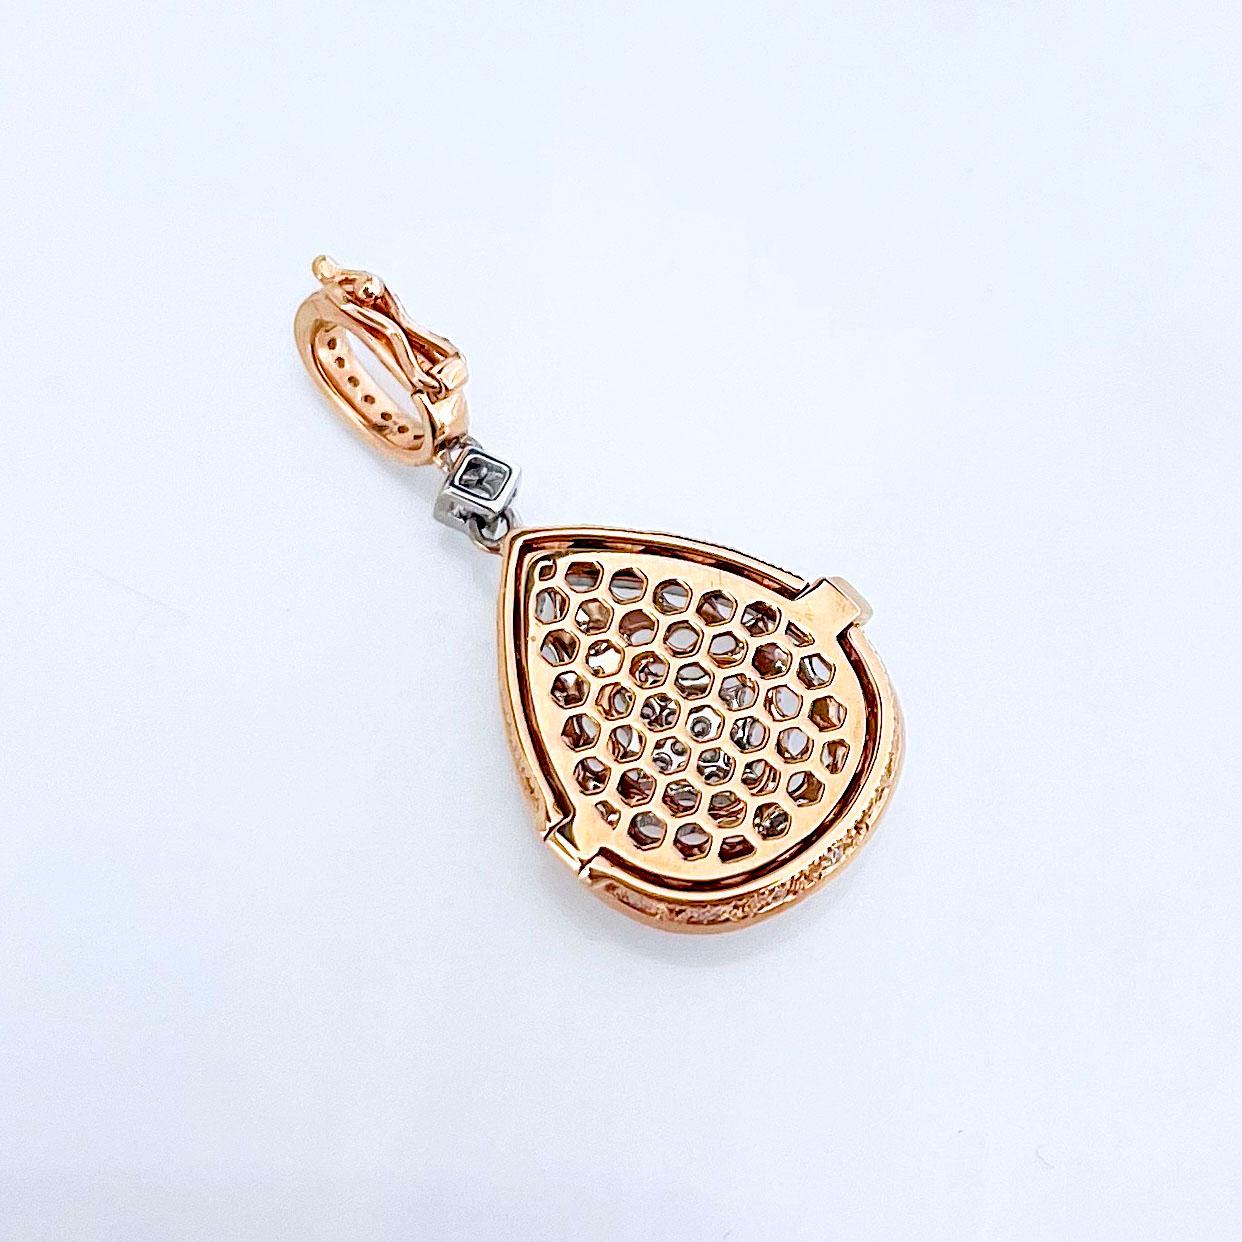 Produced by award winning Italian designer Stefano Vitolo. Stefano creates custom artisanal one of a kind jewelry with excellent gemstones in a truly old world Italian craftmanship.

Gemstones: Diamonds 0.35ct
Width x Length: 14 x 30mm